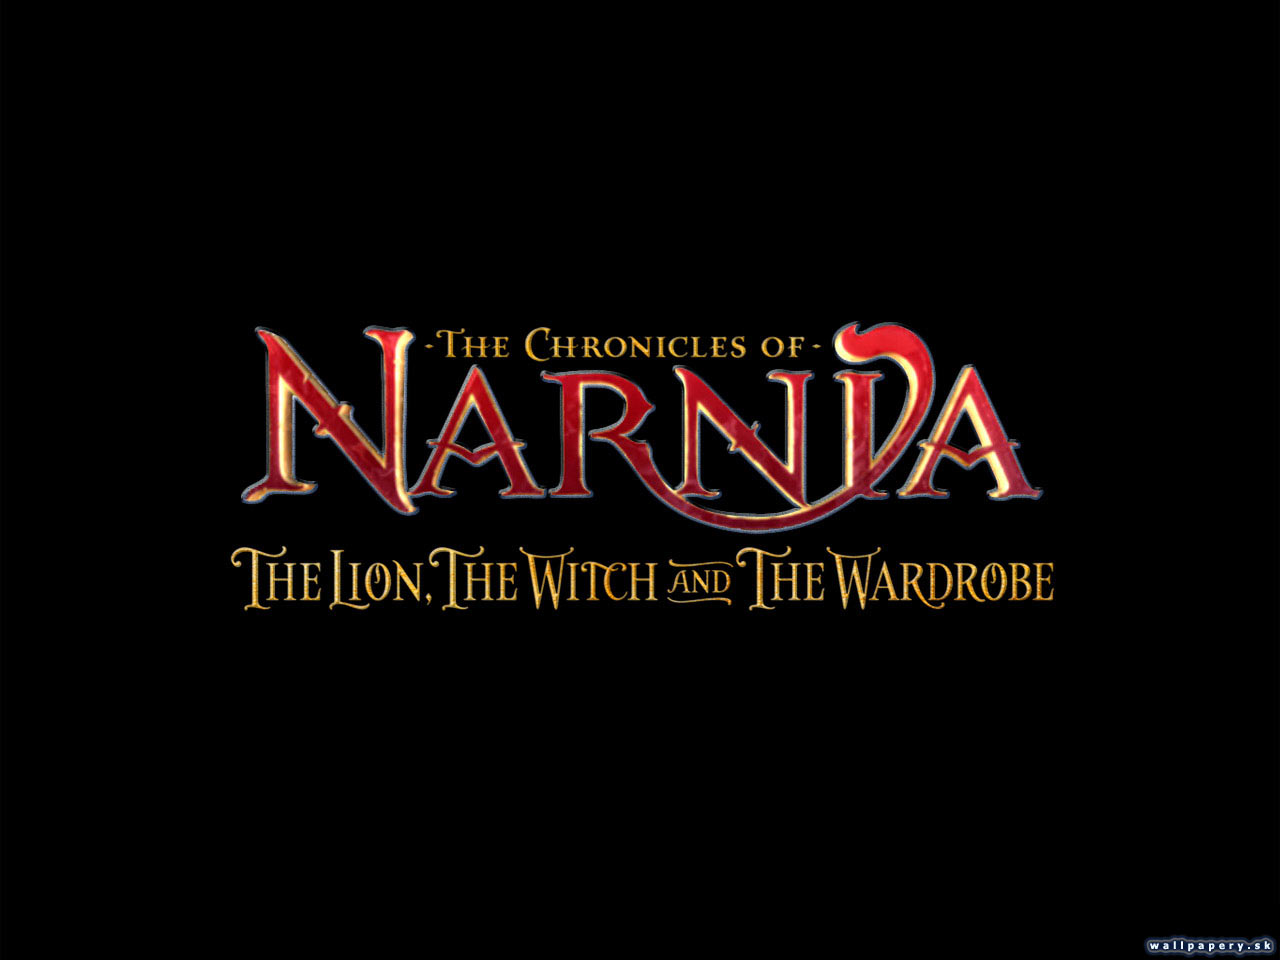 The Chronicles of Narnia: The Lion, The Witch and the Wardrobe - wallpaper 20